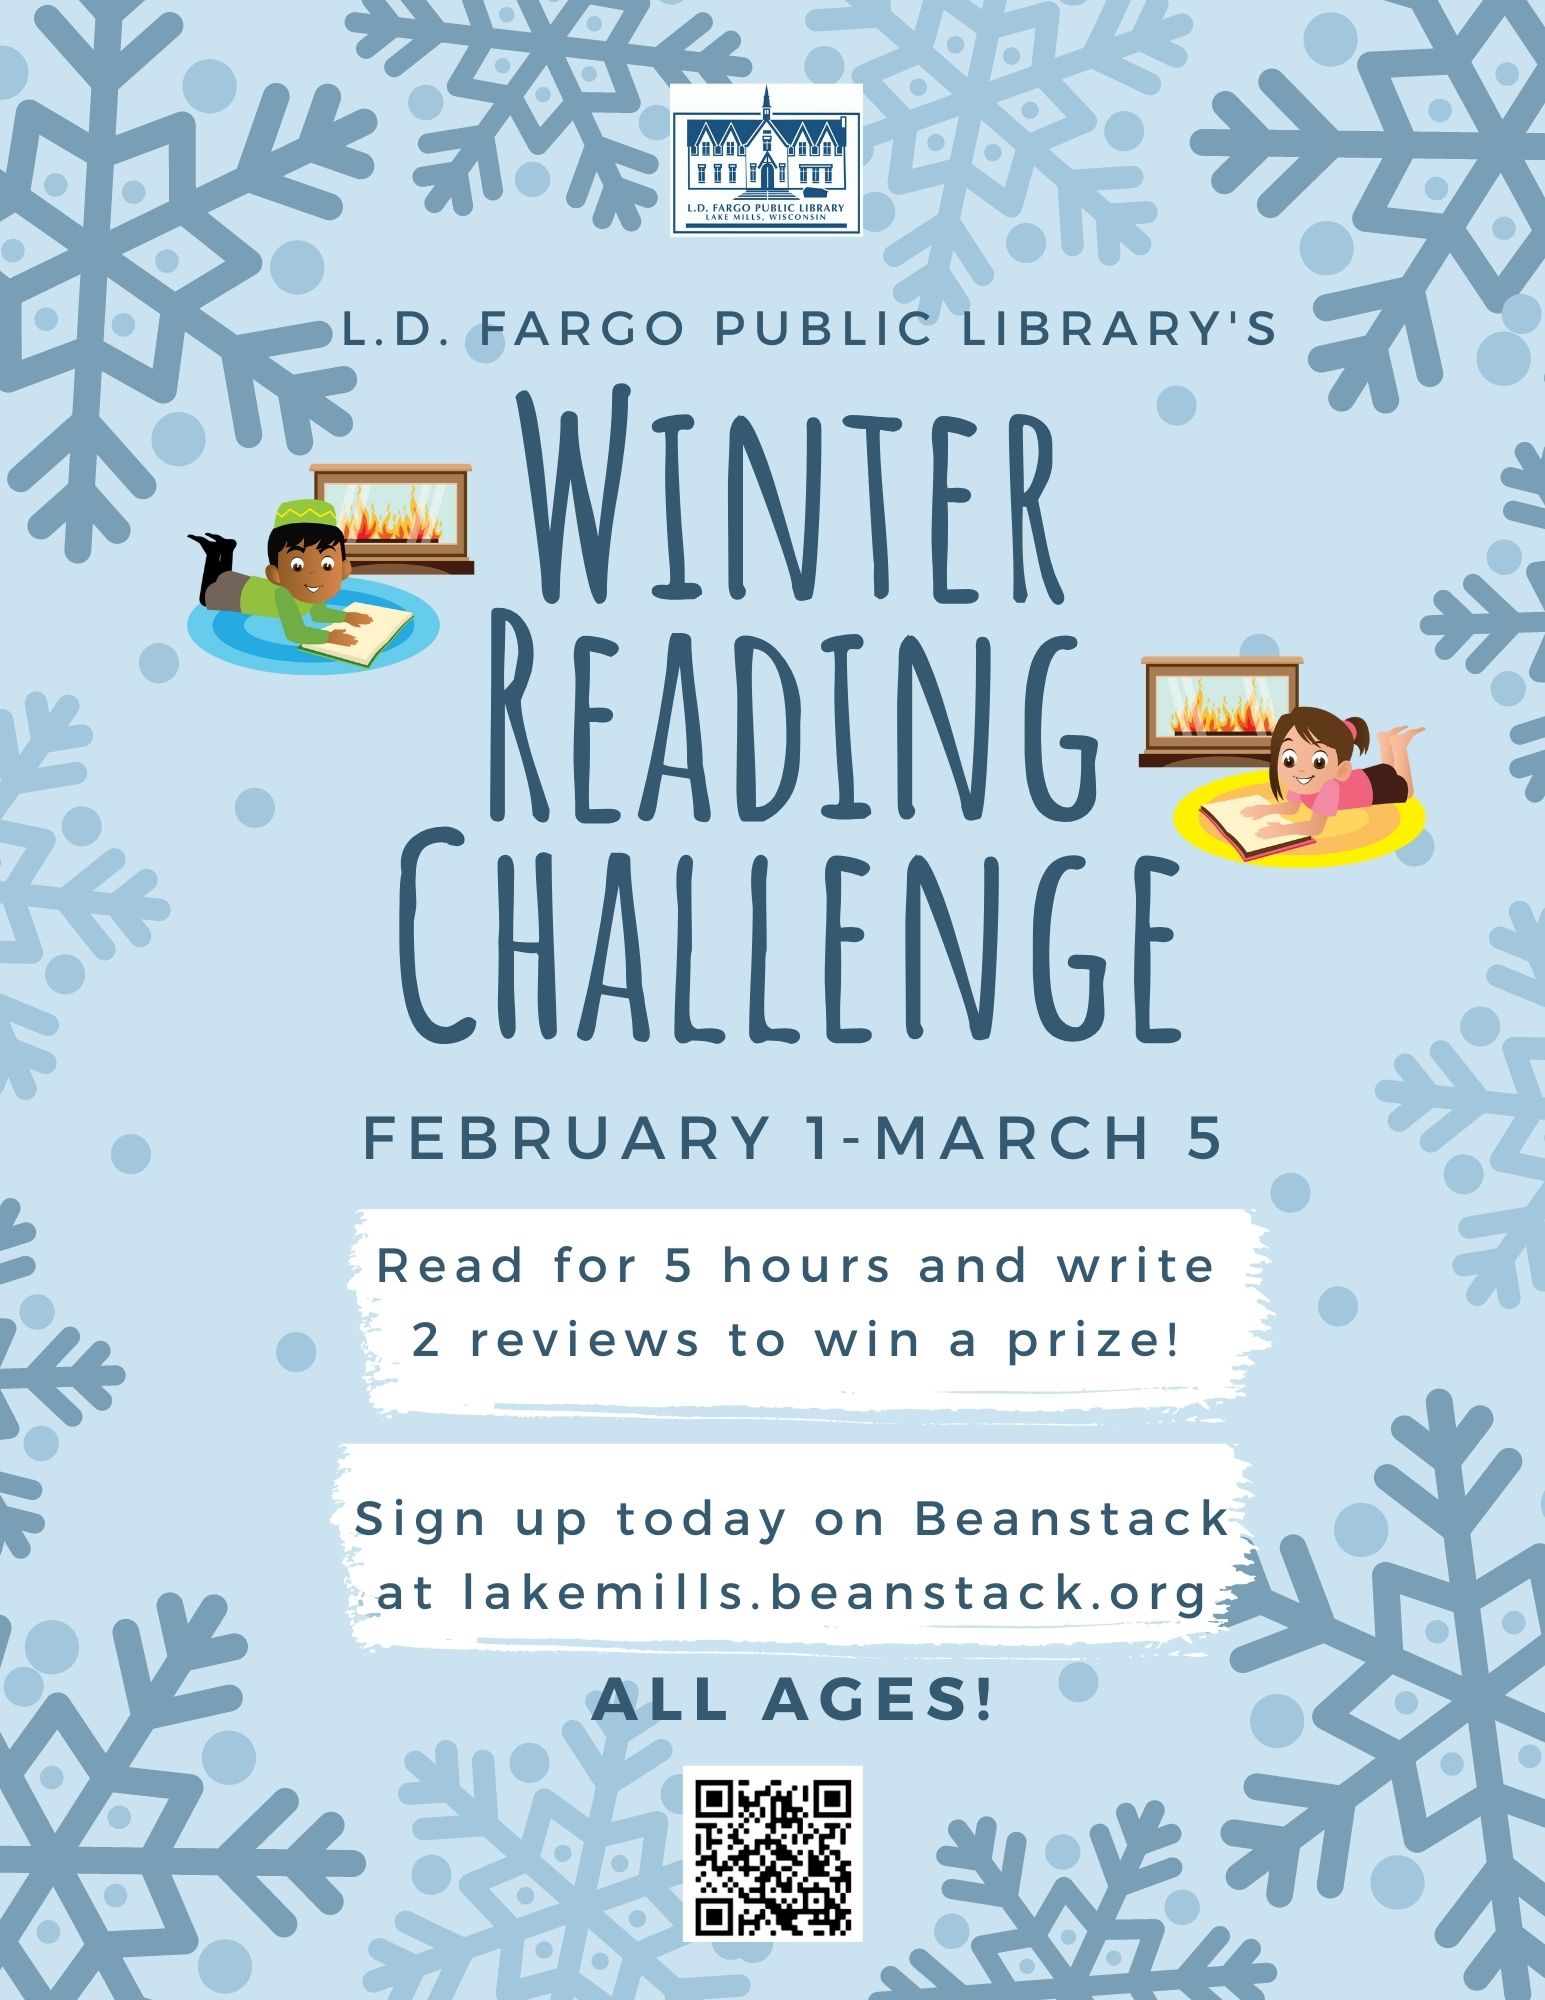 Winter Reading 2022  Registration starts January 10th  Starts February 1st-March 5th.   Read 5 hours and write 2 reviews to win a prize.   Sign up on Beanstack at lakemills.beanstack.org